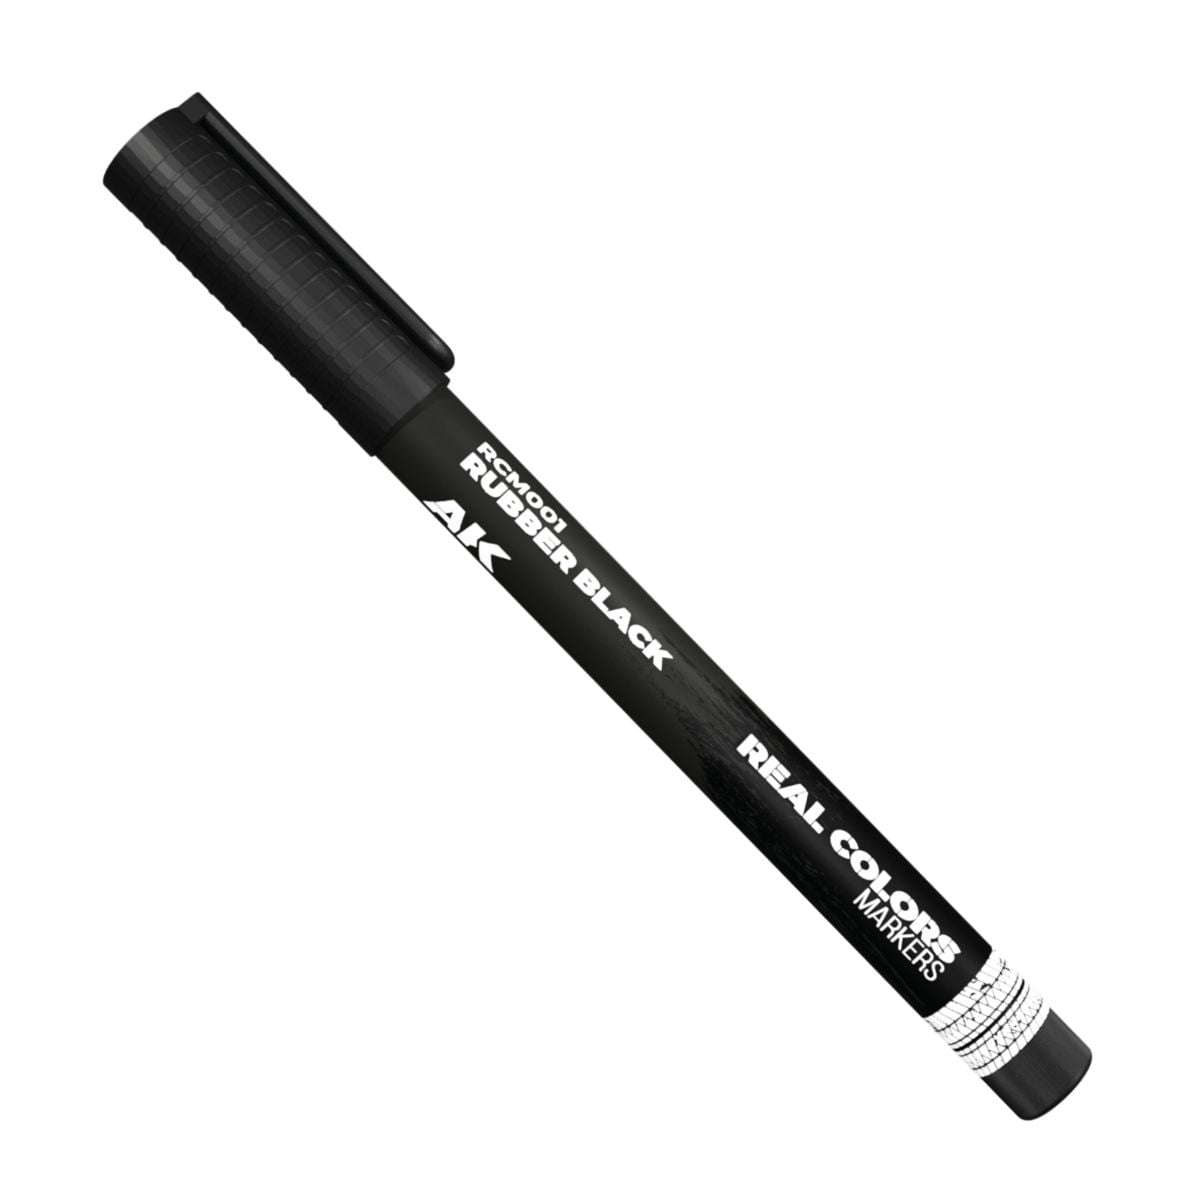 Real Colors Marker: Rubber Black - Acrylic Paint Marker